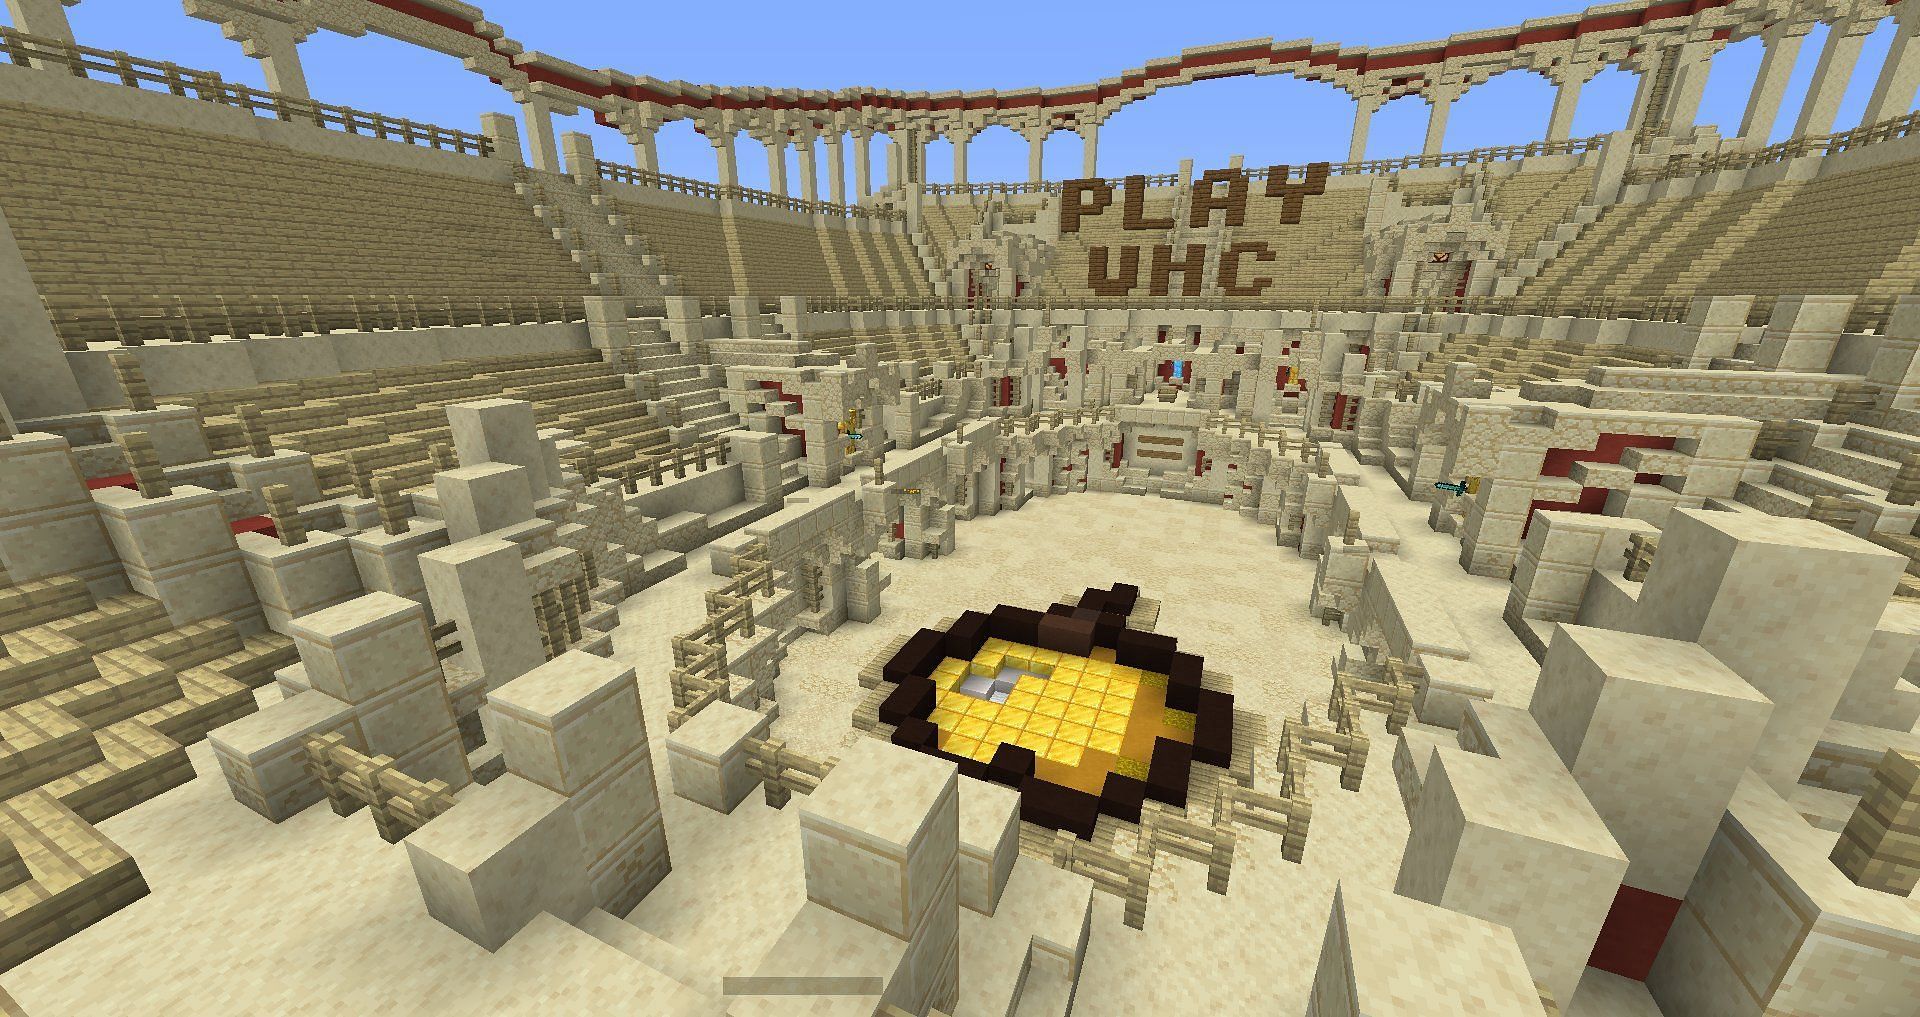 PlayUHC is a great server for the UHC mode (Image via Twitter, @playUHC)